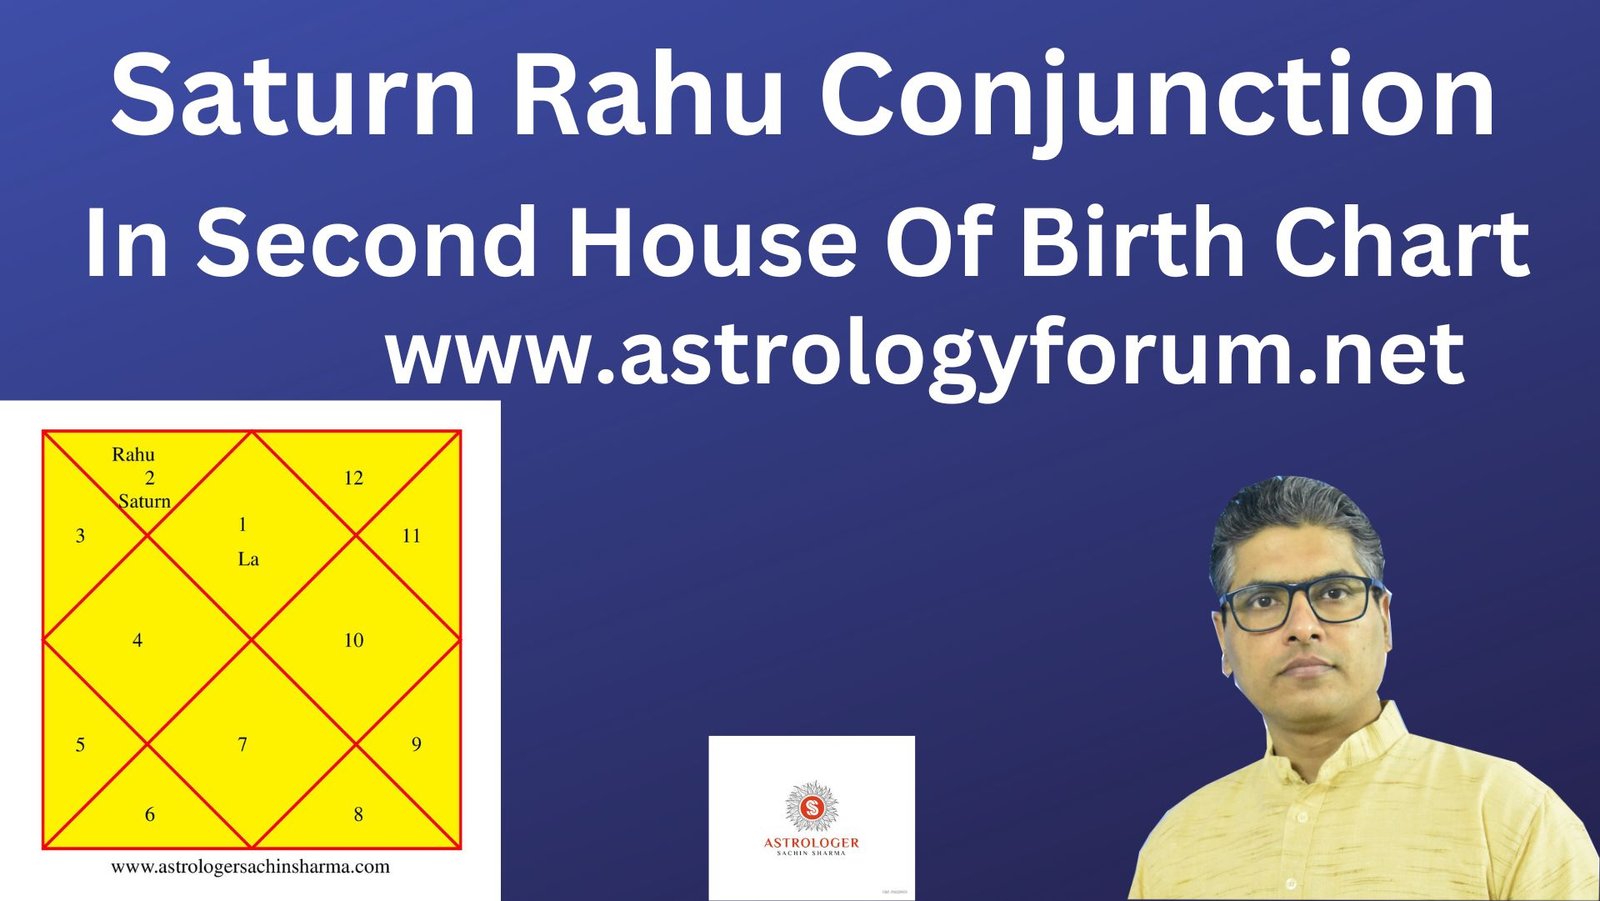 Rahu Saturn in the second house